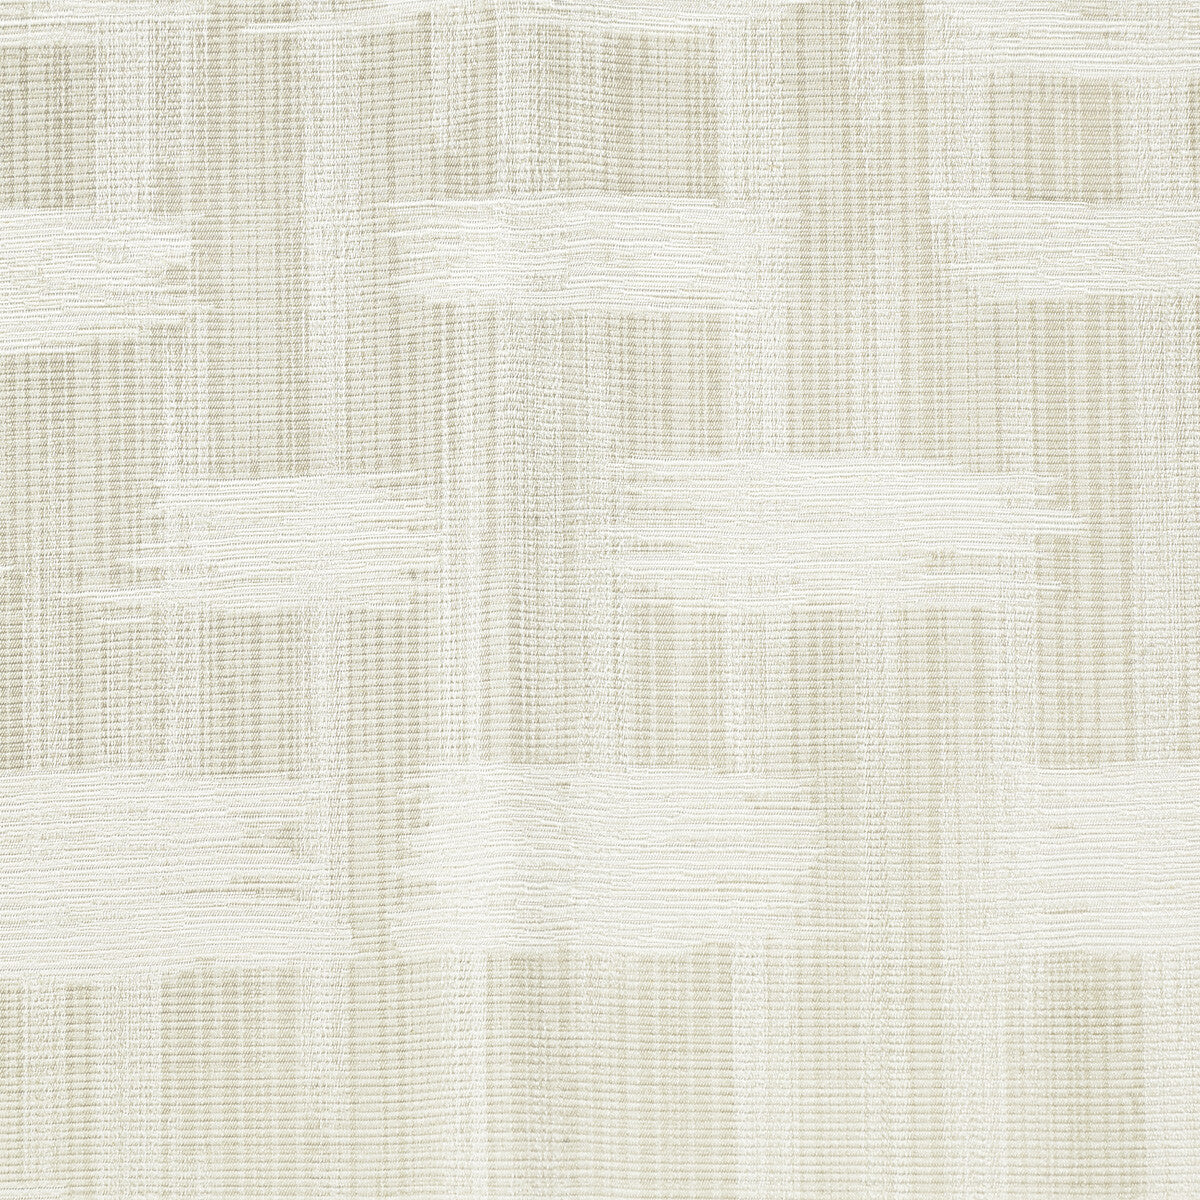 Maze fabric in 7 color - pattern LZ-30396.07.0 - by Kravet Design in the Lizzo collection